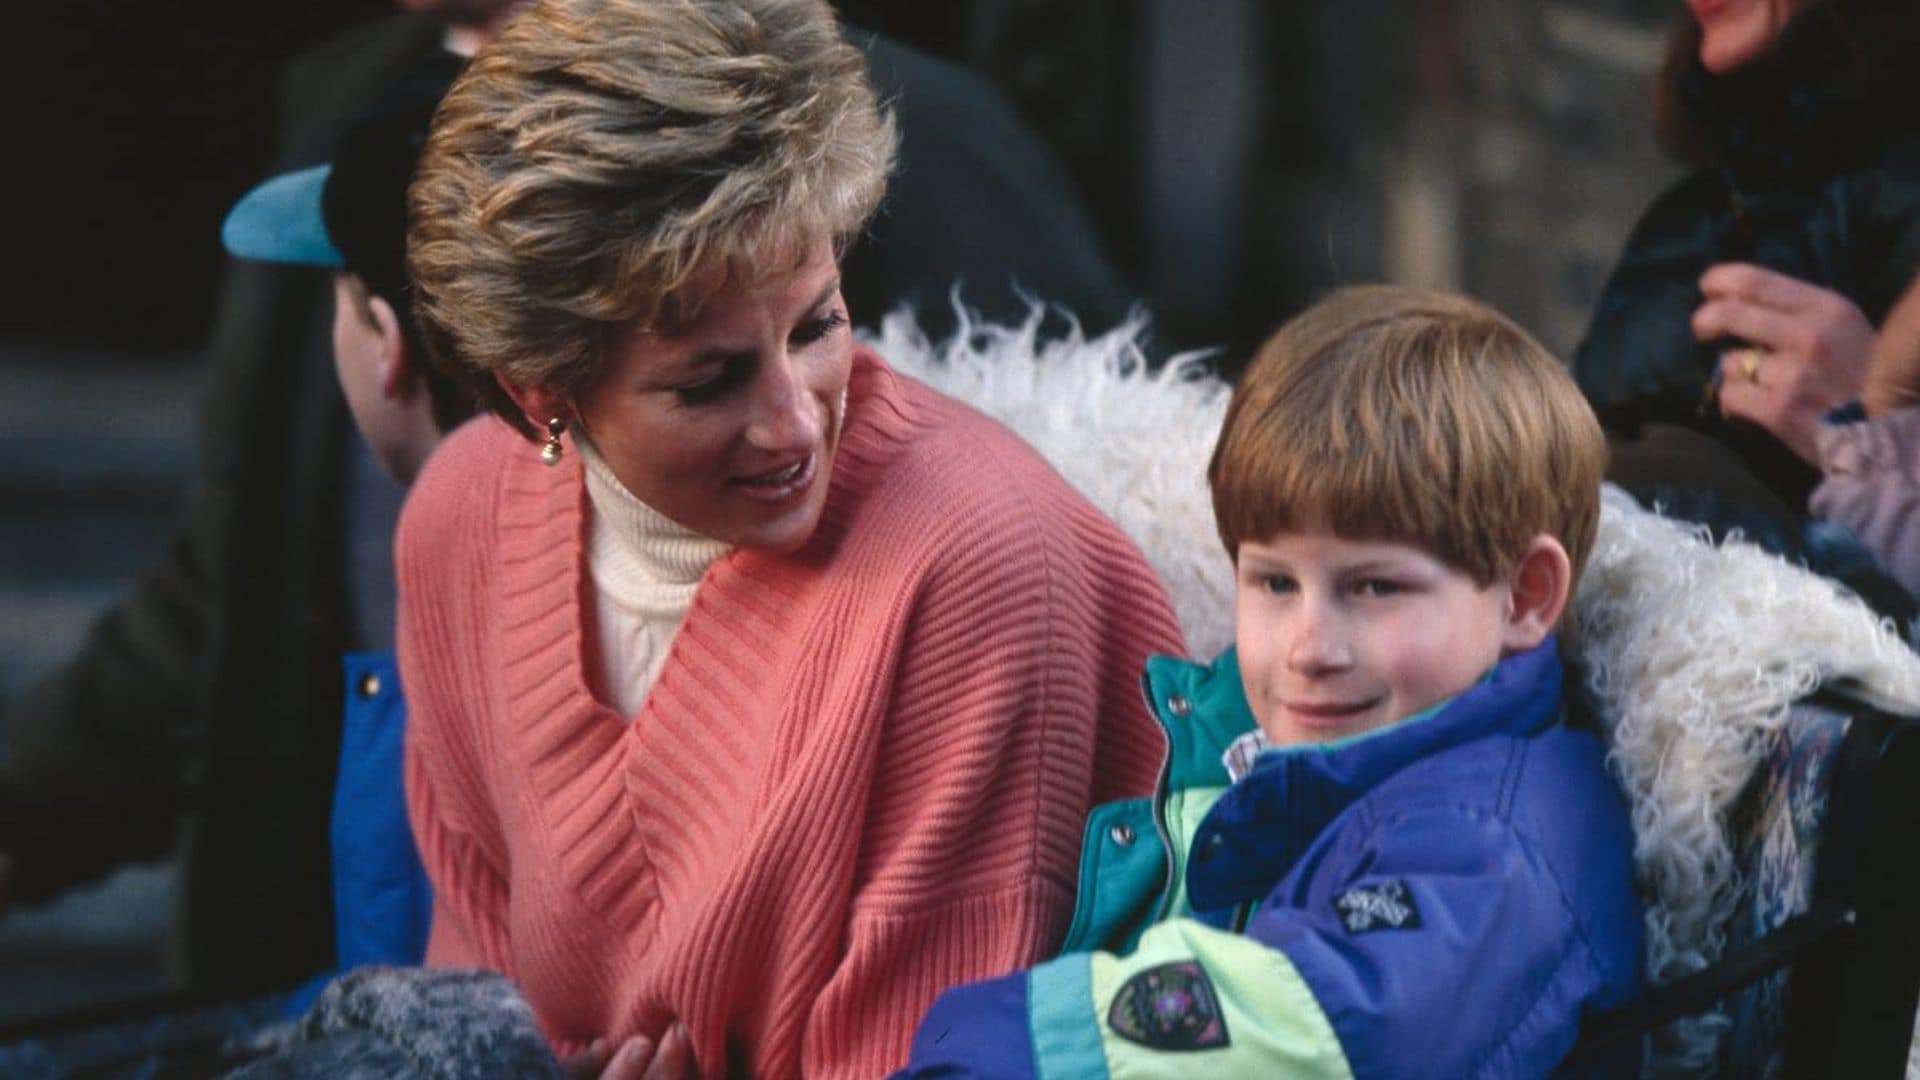 Prince Harry says he is ‘living the life’ that mom Princess Diana ‘wanted to live for herself’